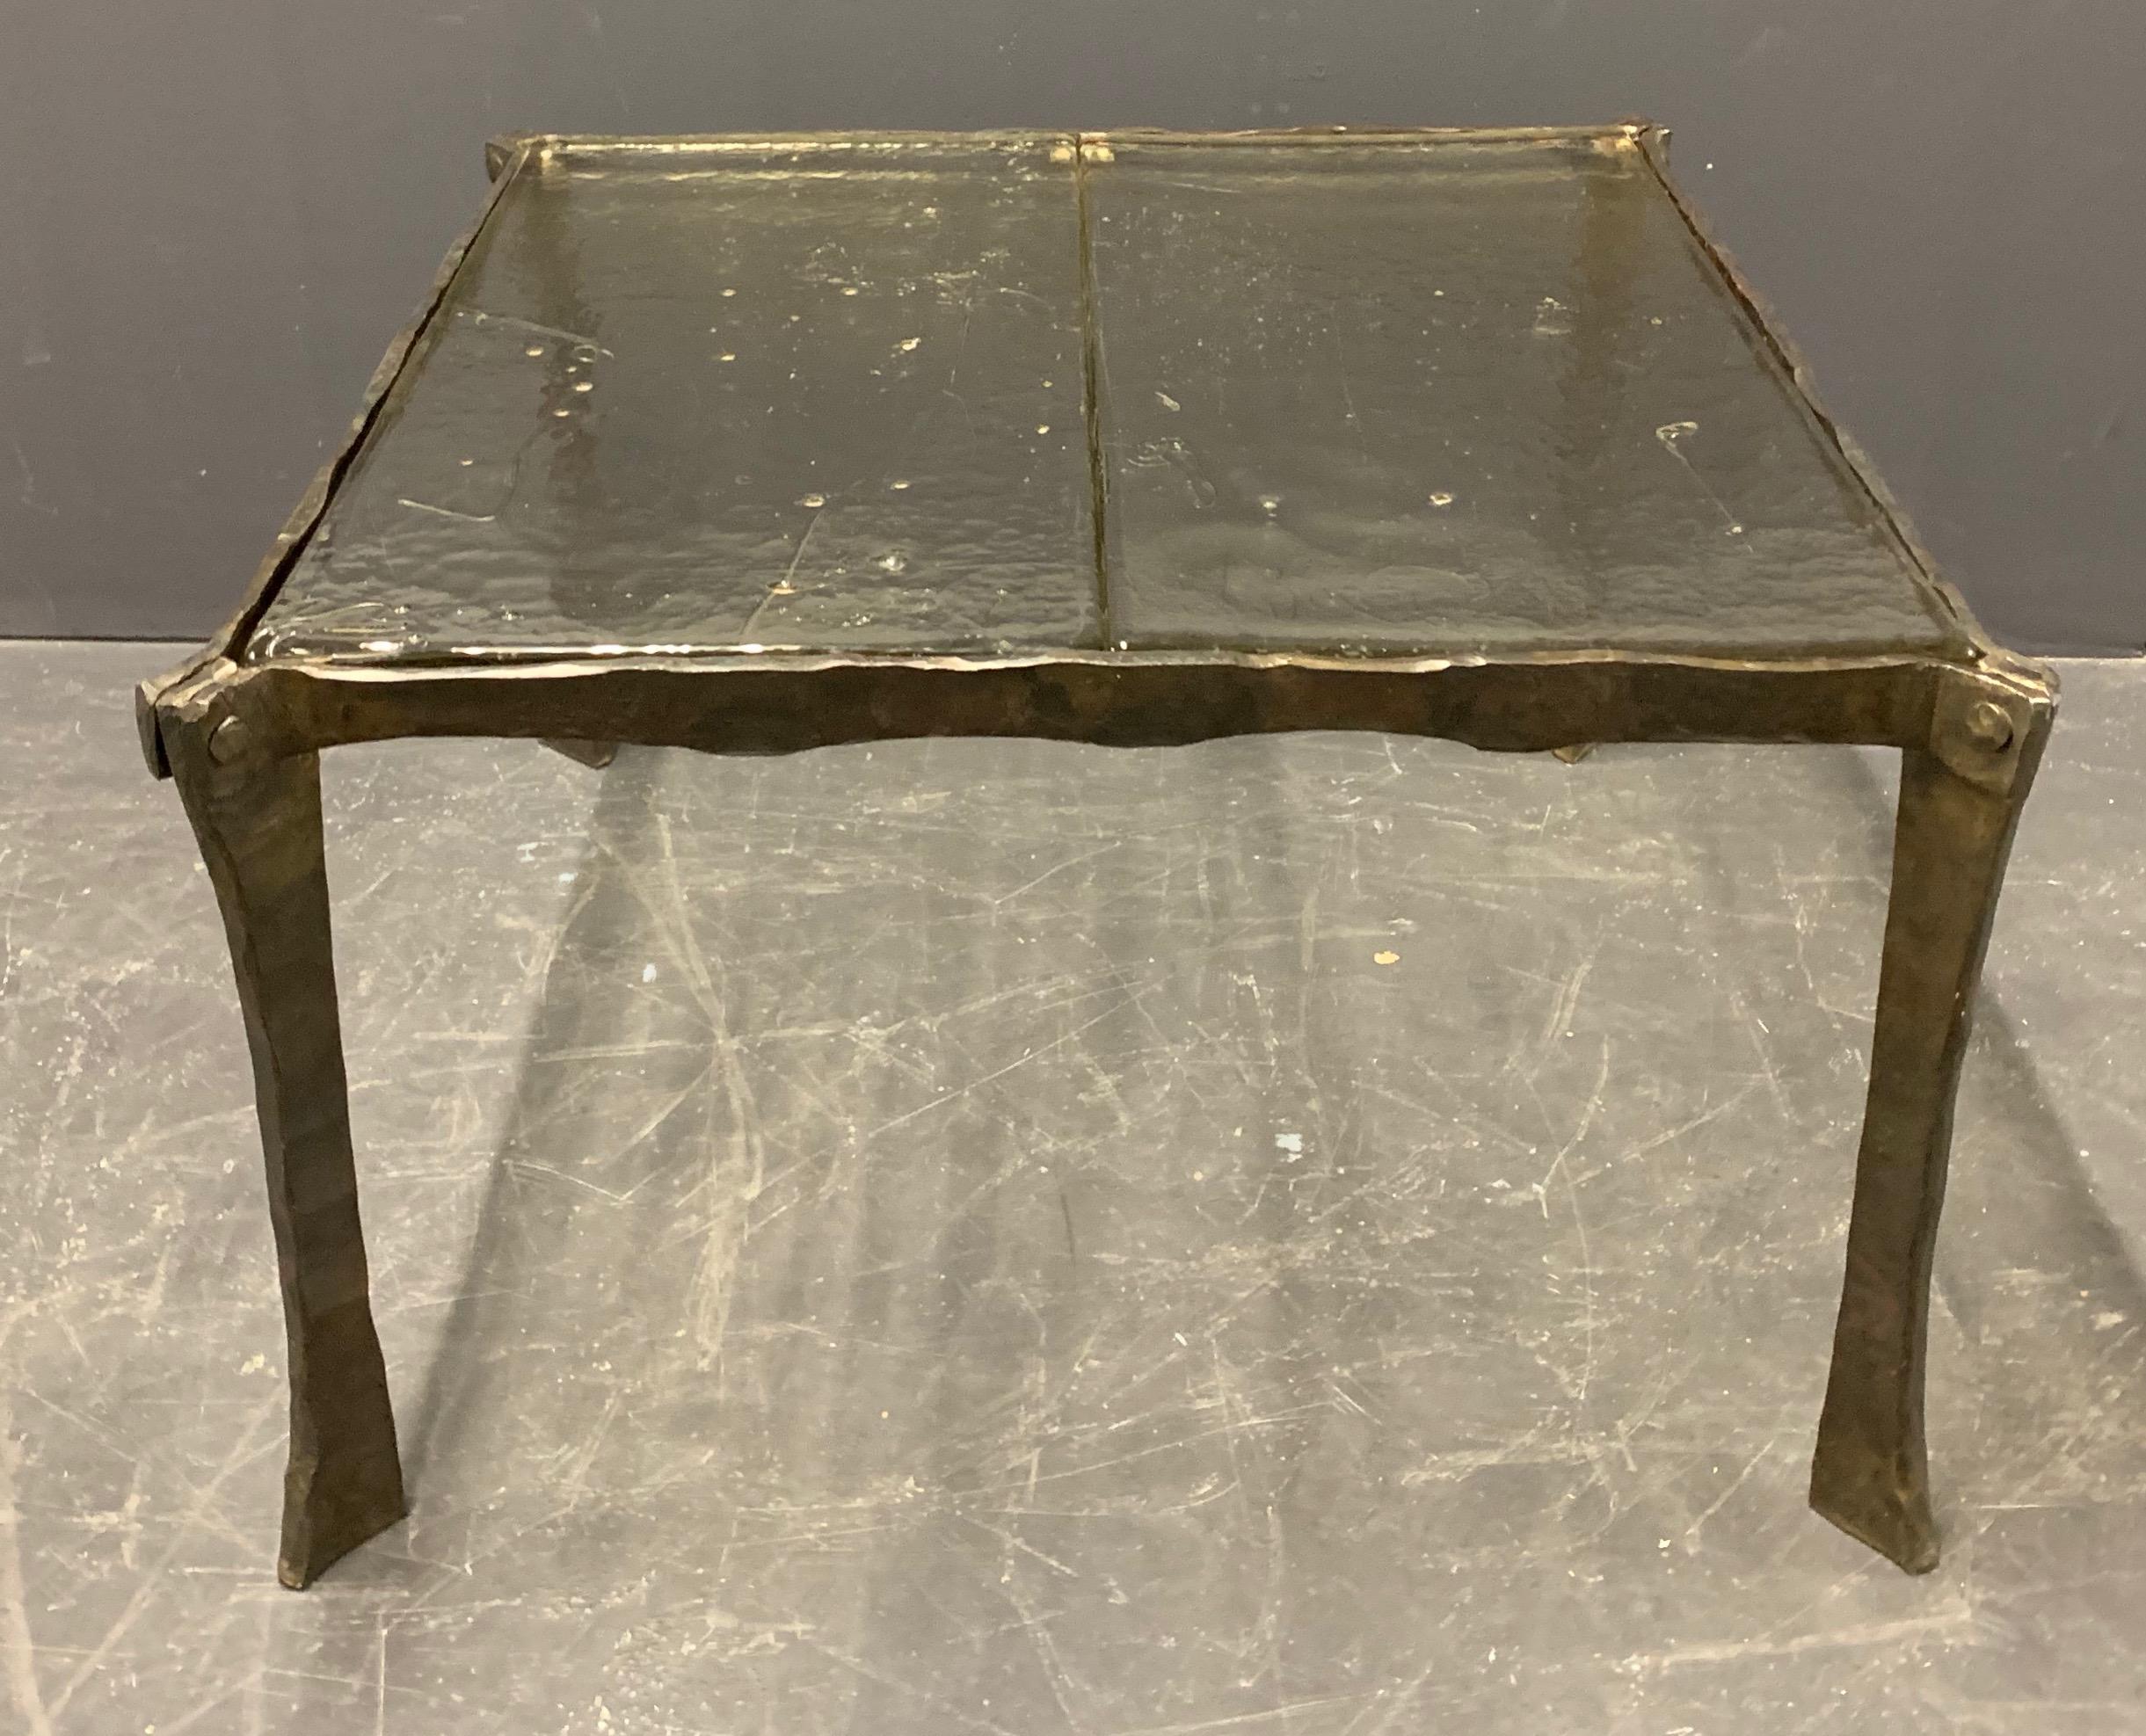 Wonderful artist Brutalist coffee table with rare glass split top version. Glass tops and base are made by hand.